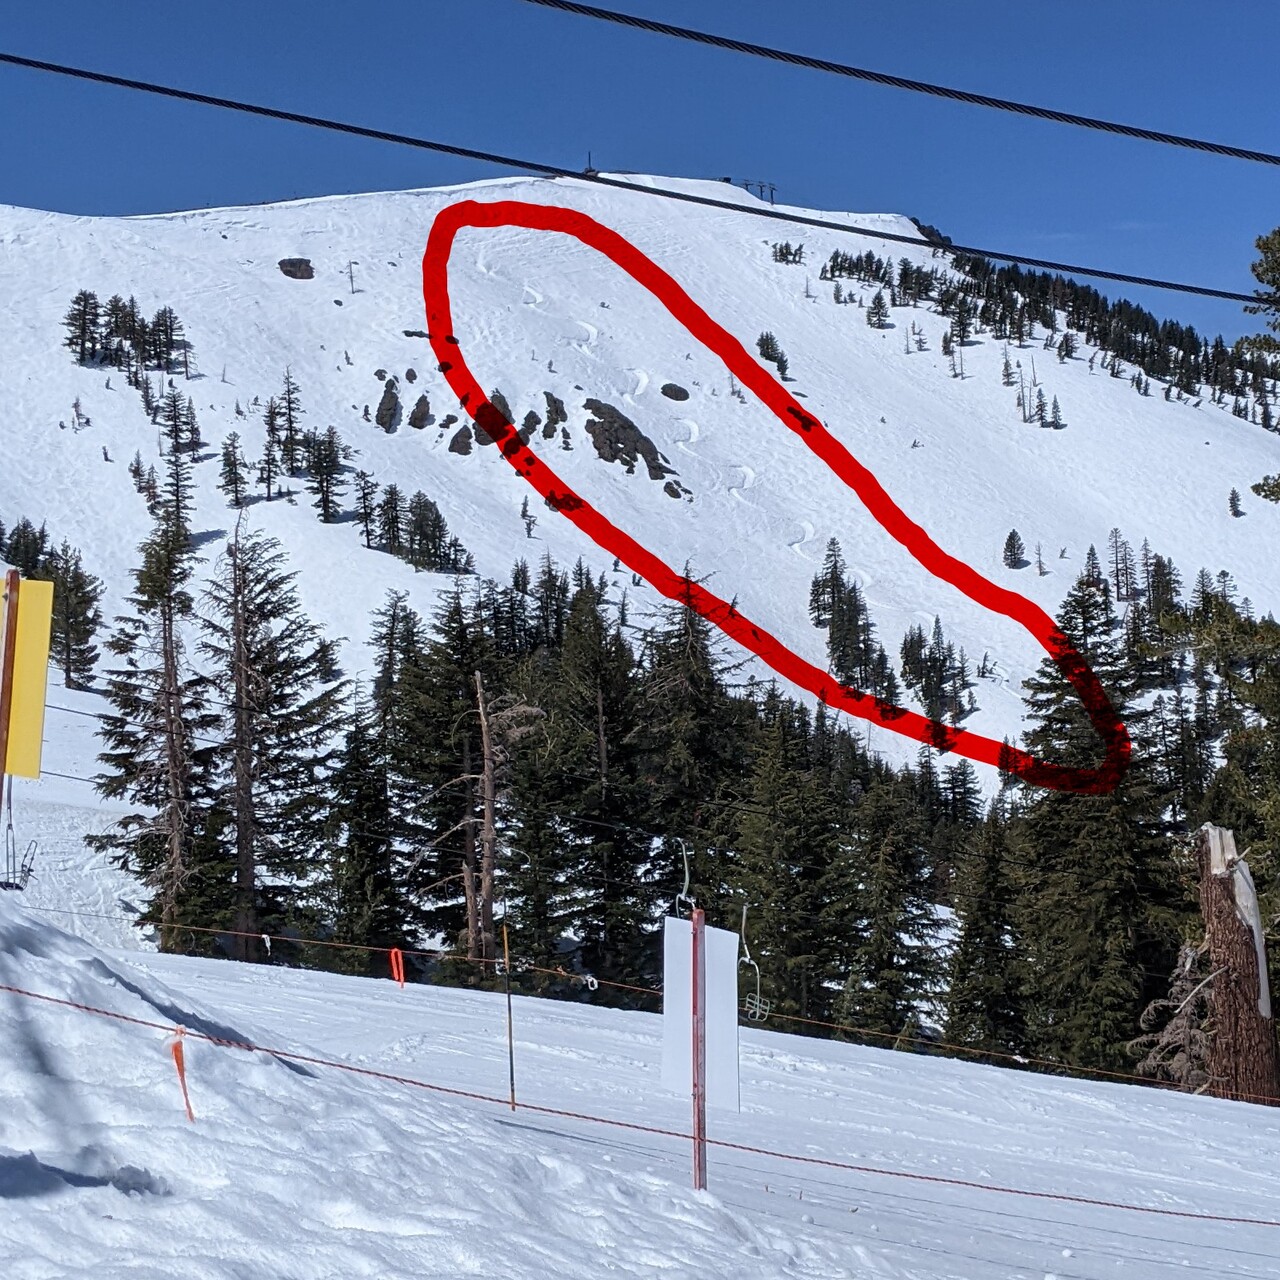 view of Wagon Wheel Bowl and Cornice Express chair, with crazy S-shaped trench in snow field highlighted